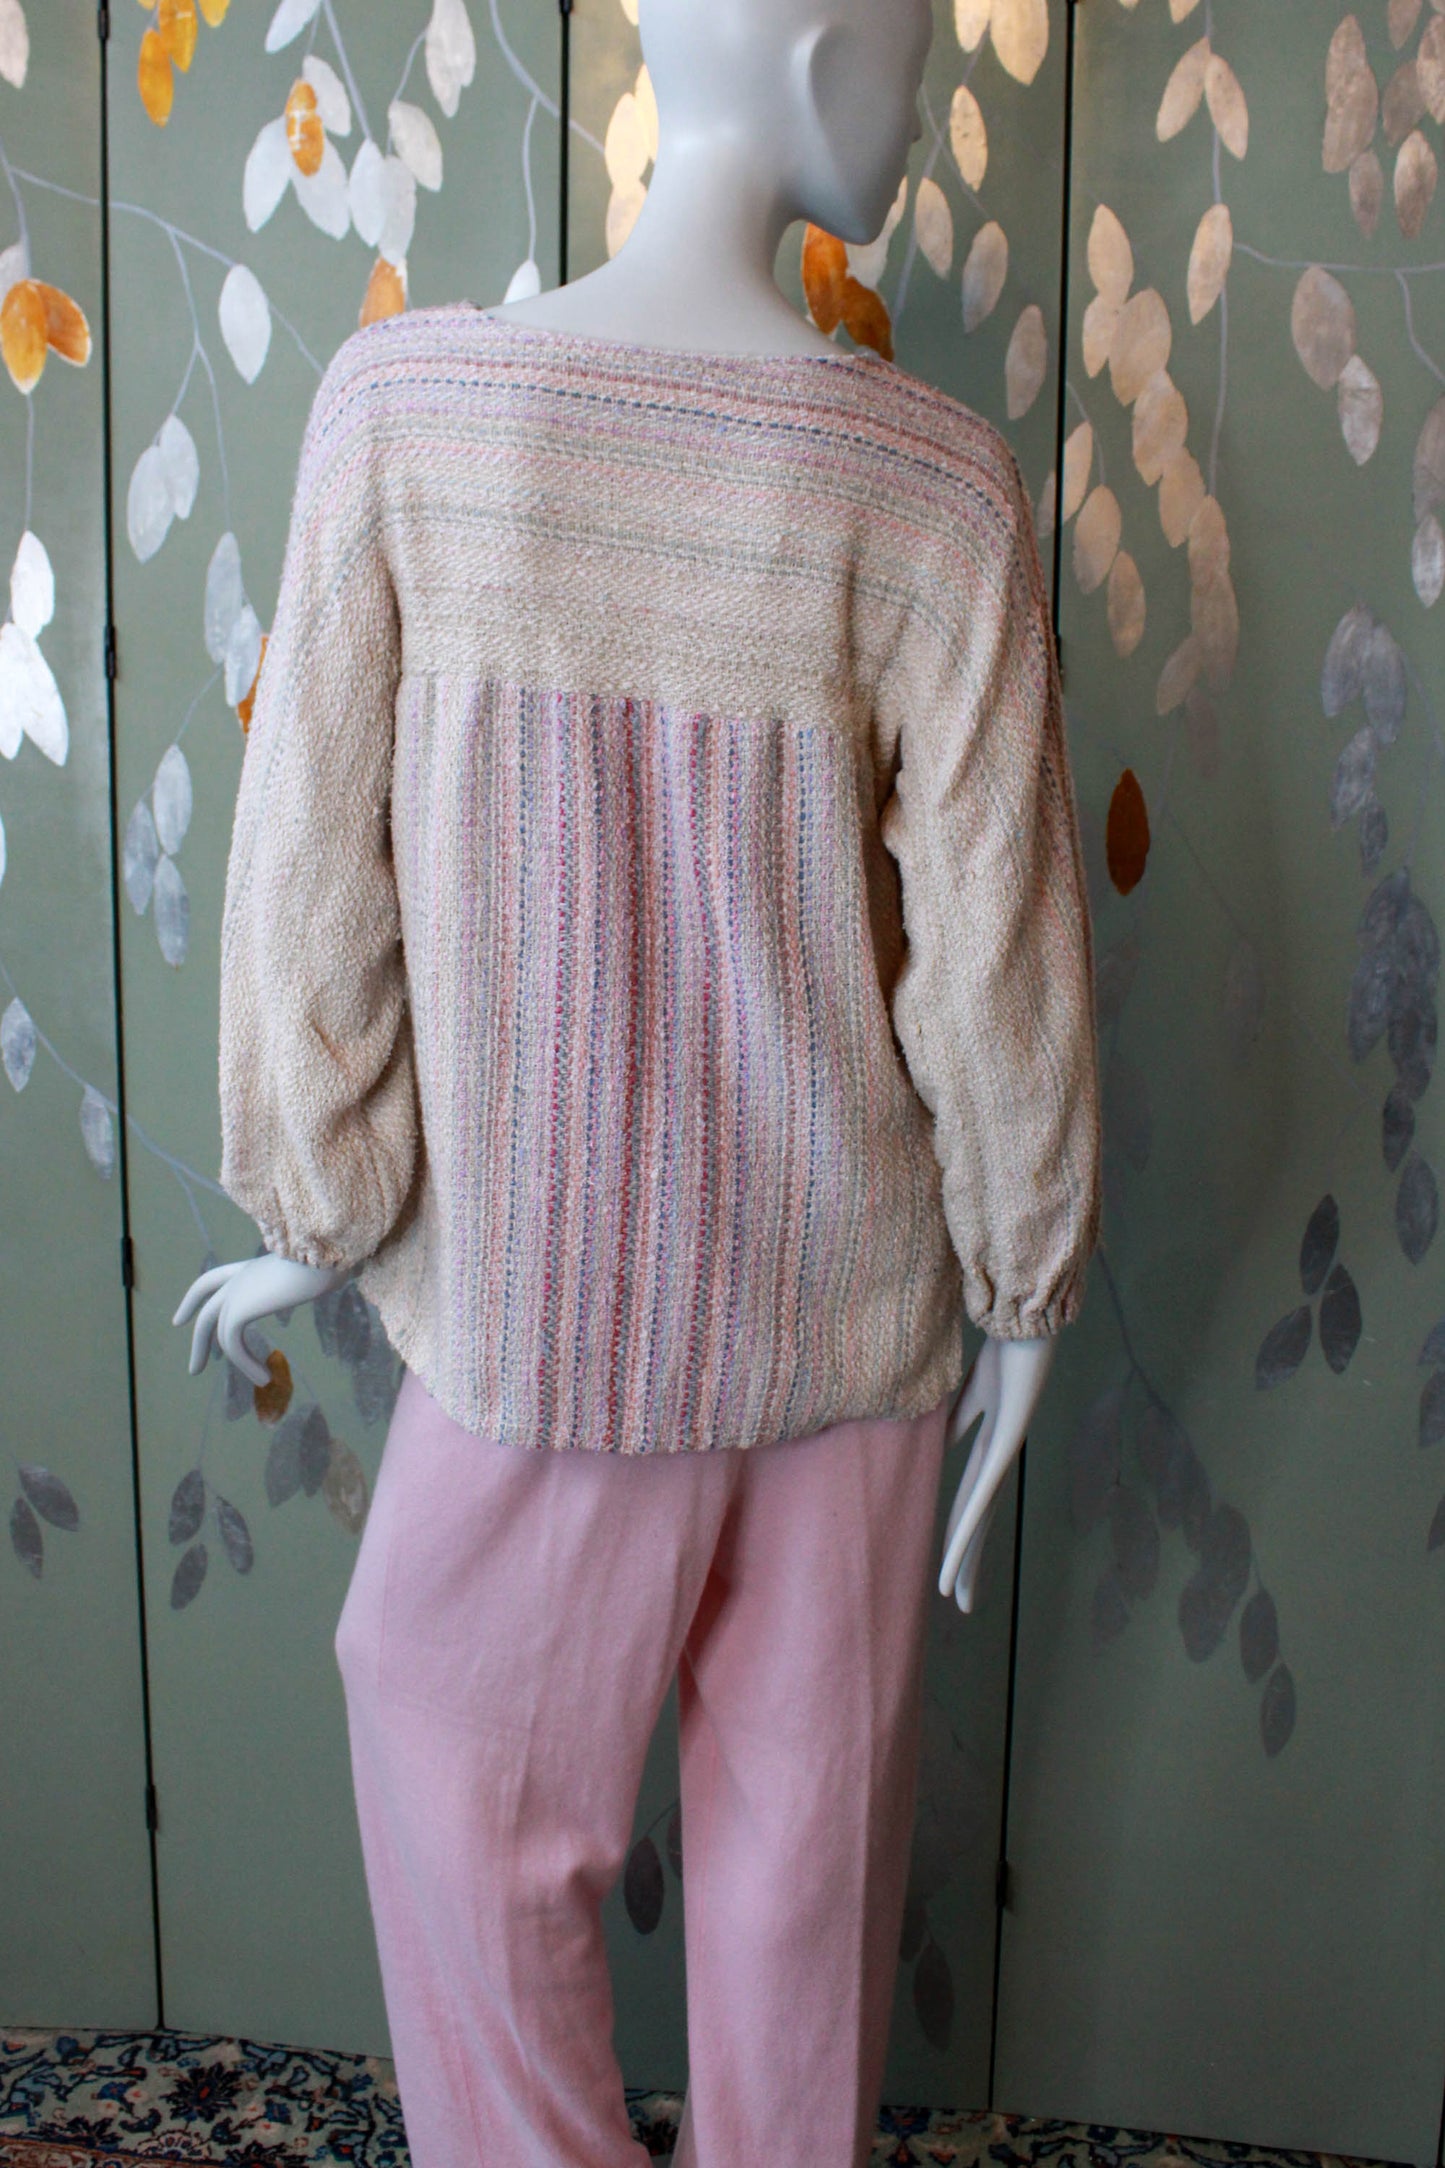 Pastel Hand Knit Sweater, Large